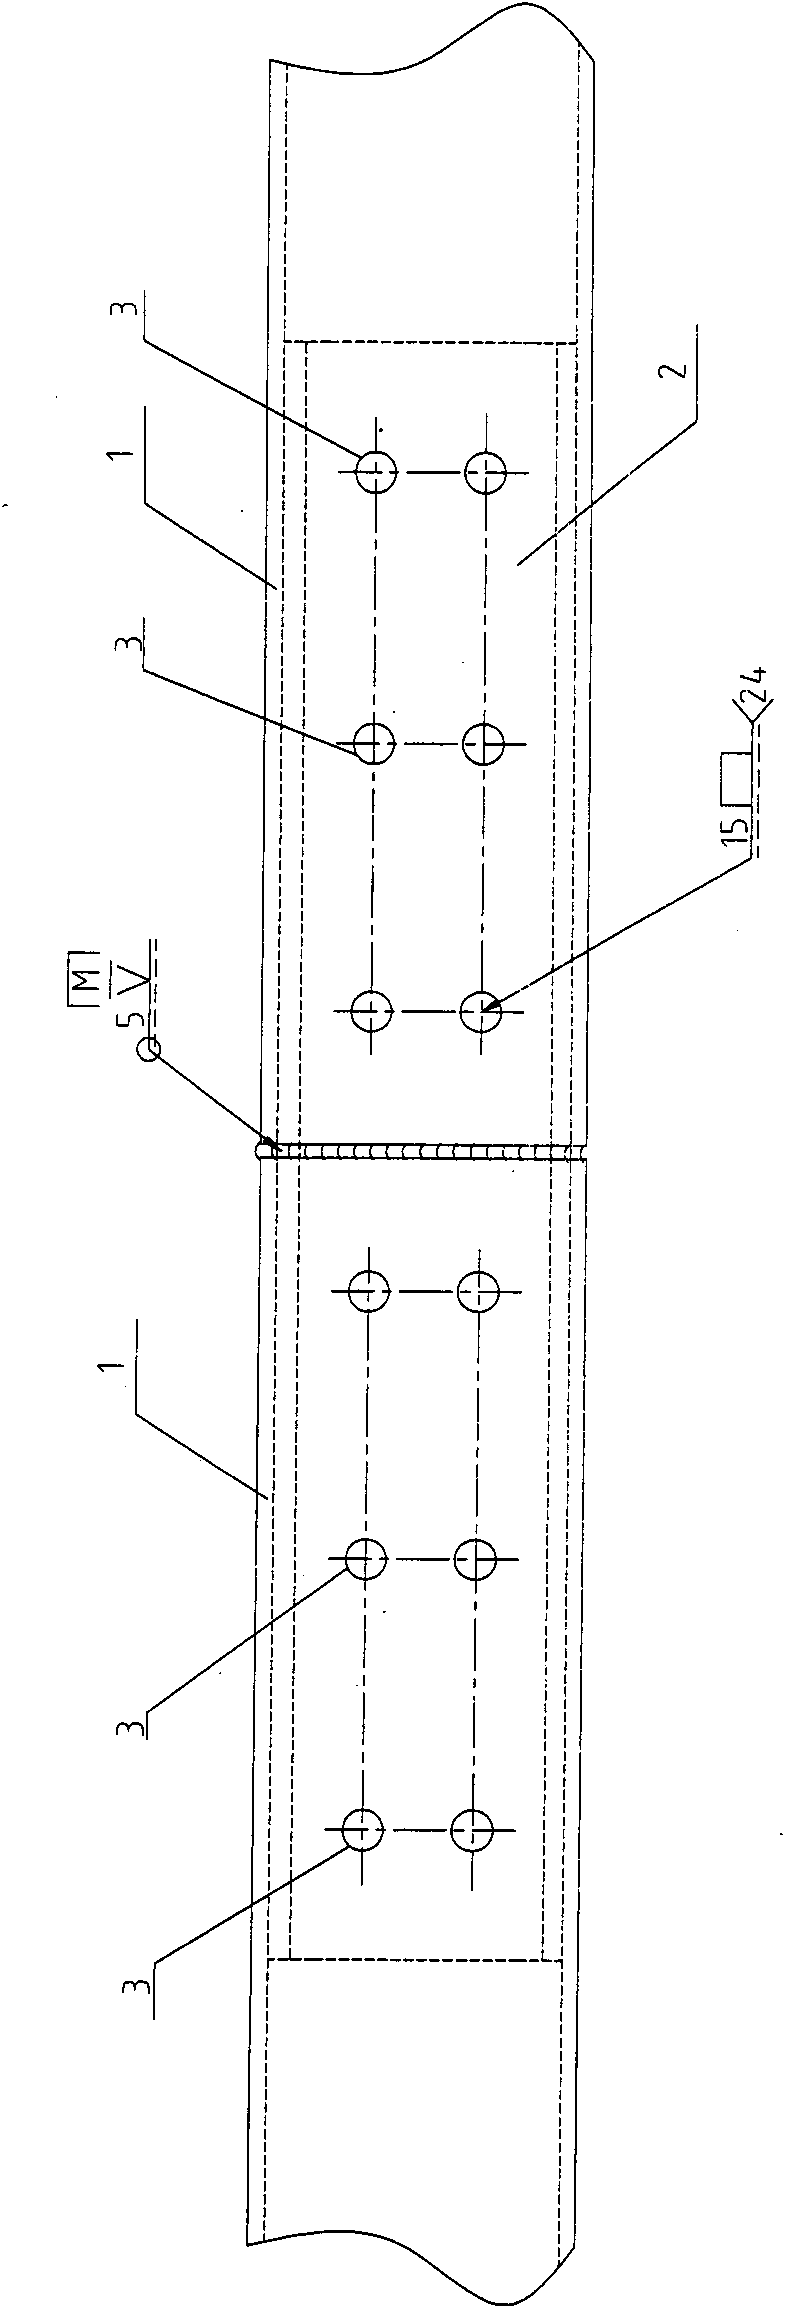 Main girder square steel splicing structure on escalator or moving pavement